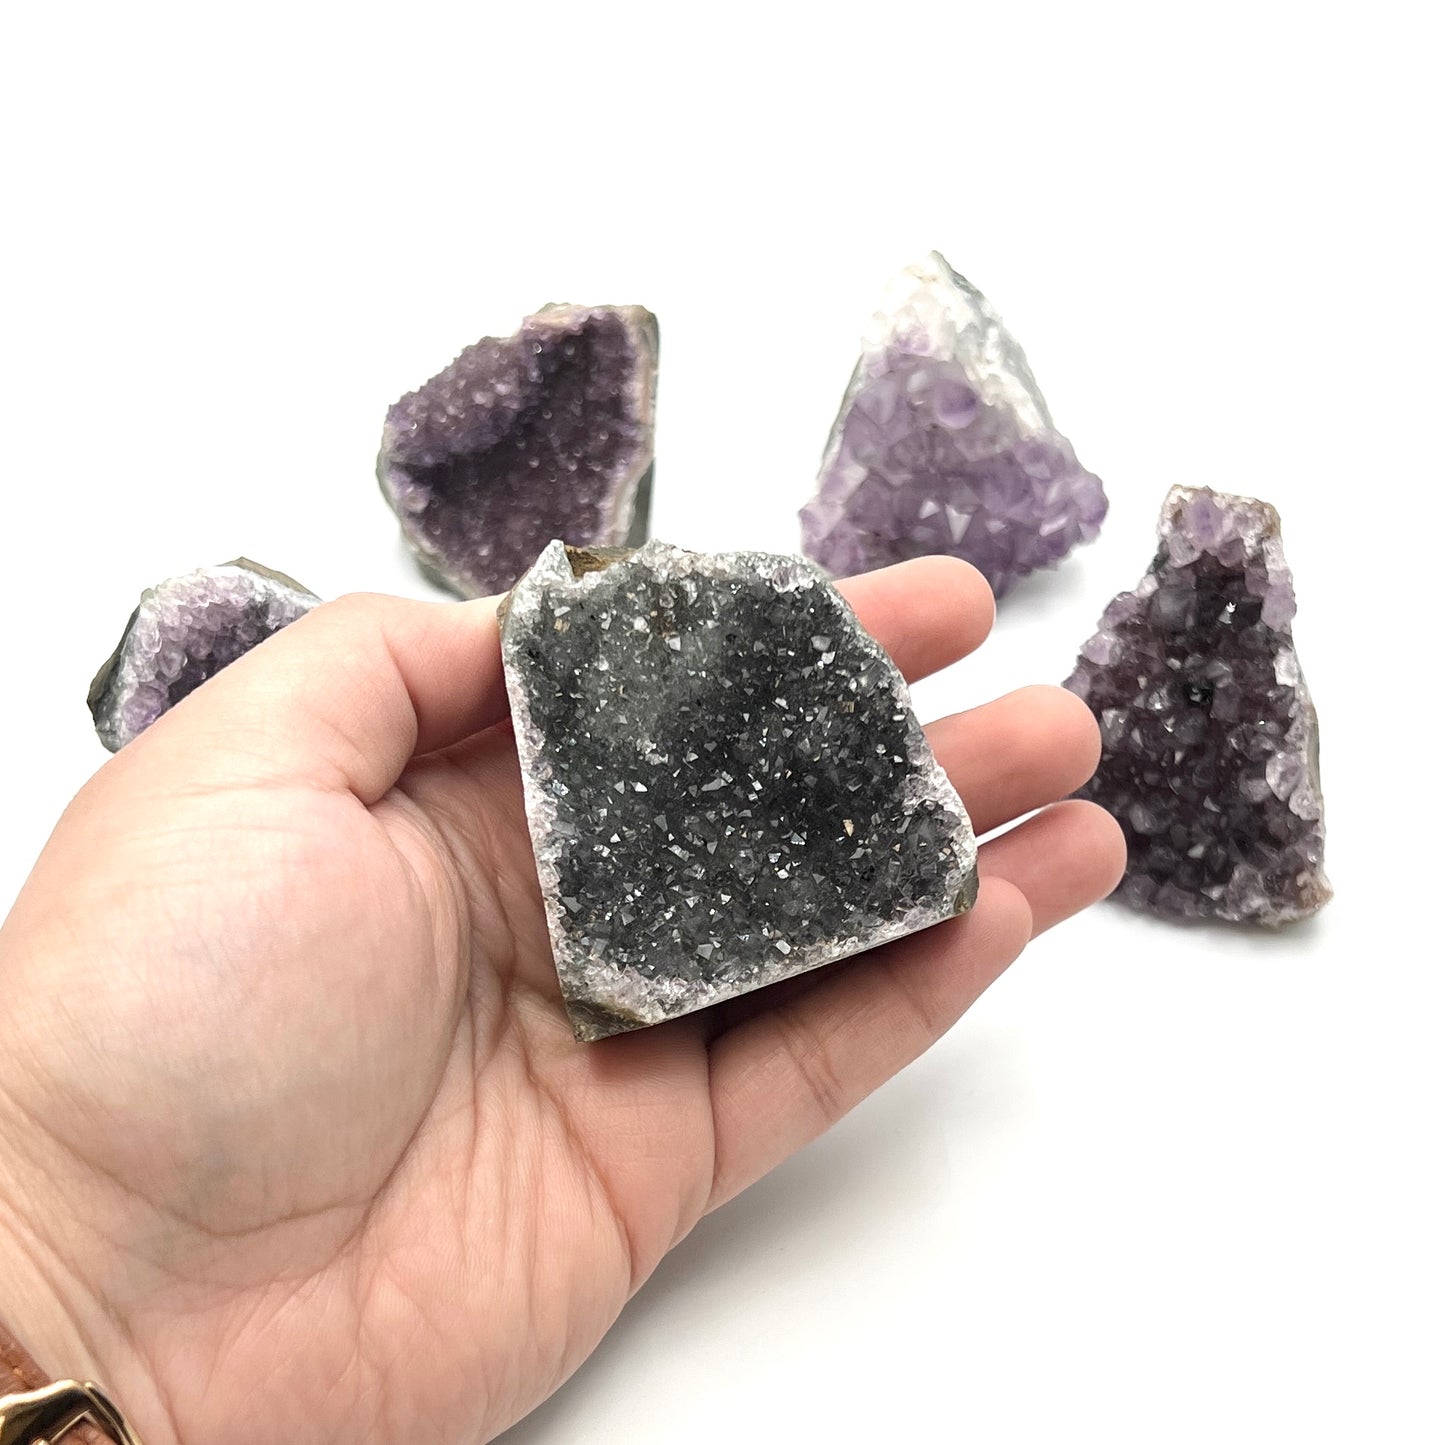 Small Amethyst Cathedrals